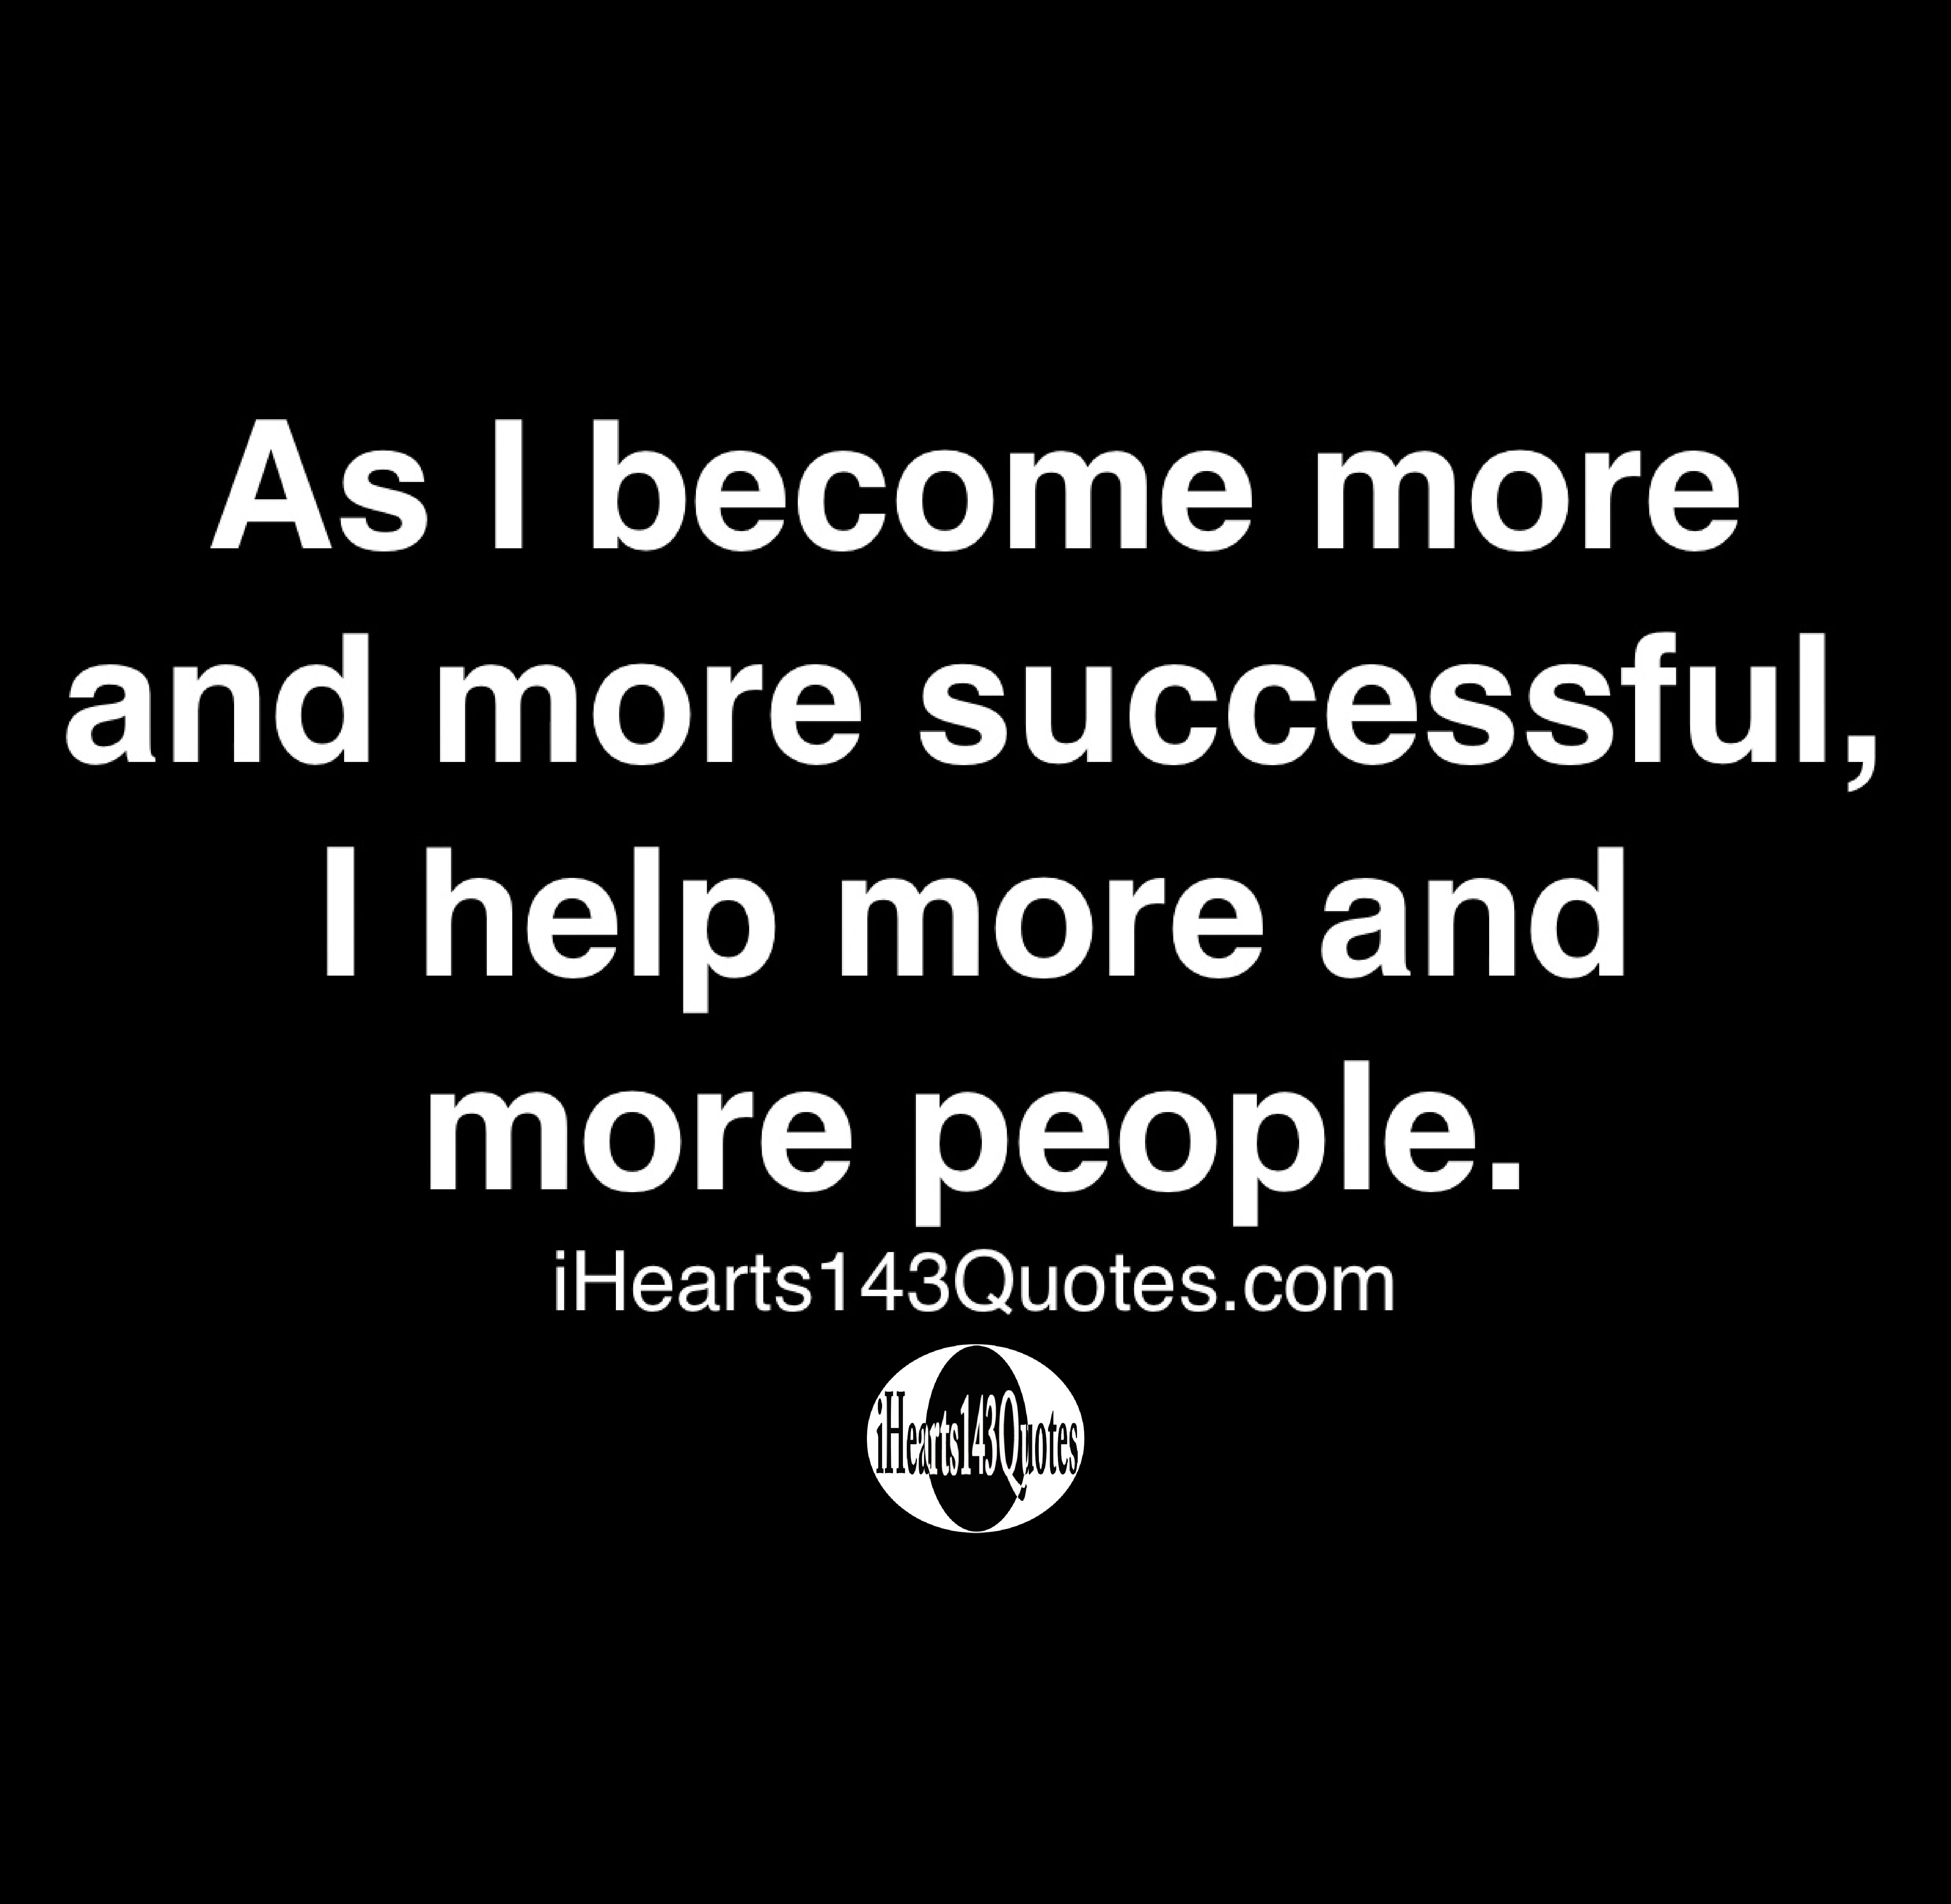 As I become more and more successful, I help more and more people ...